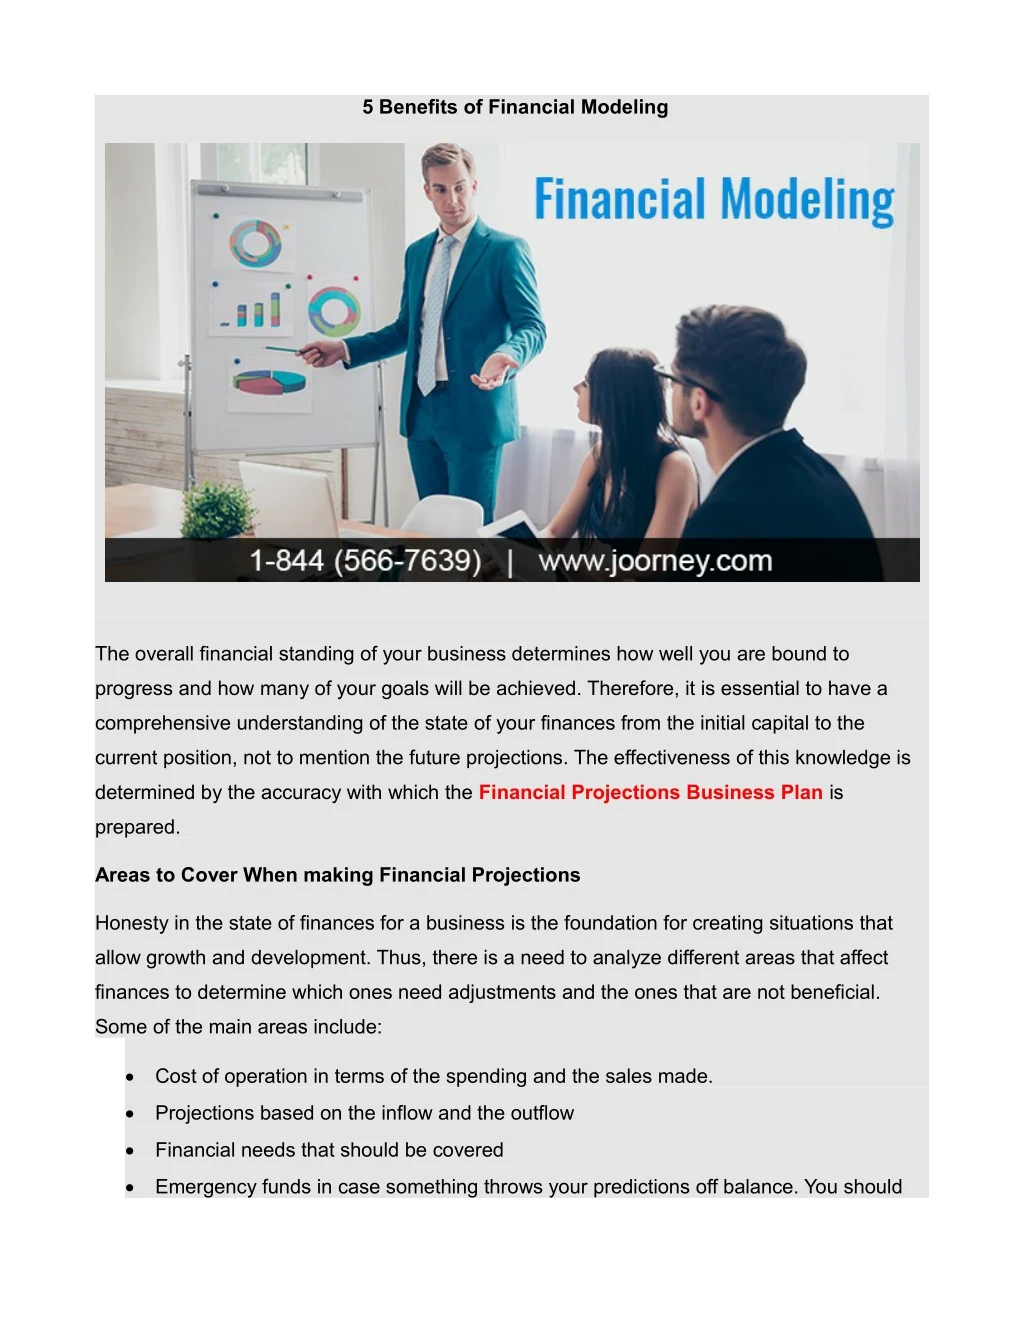 5 benefits of financial modeling